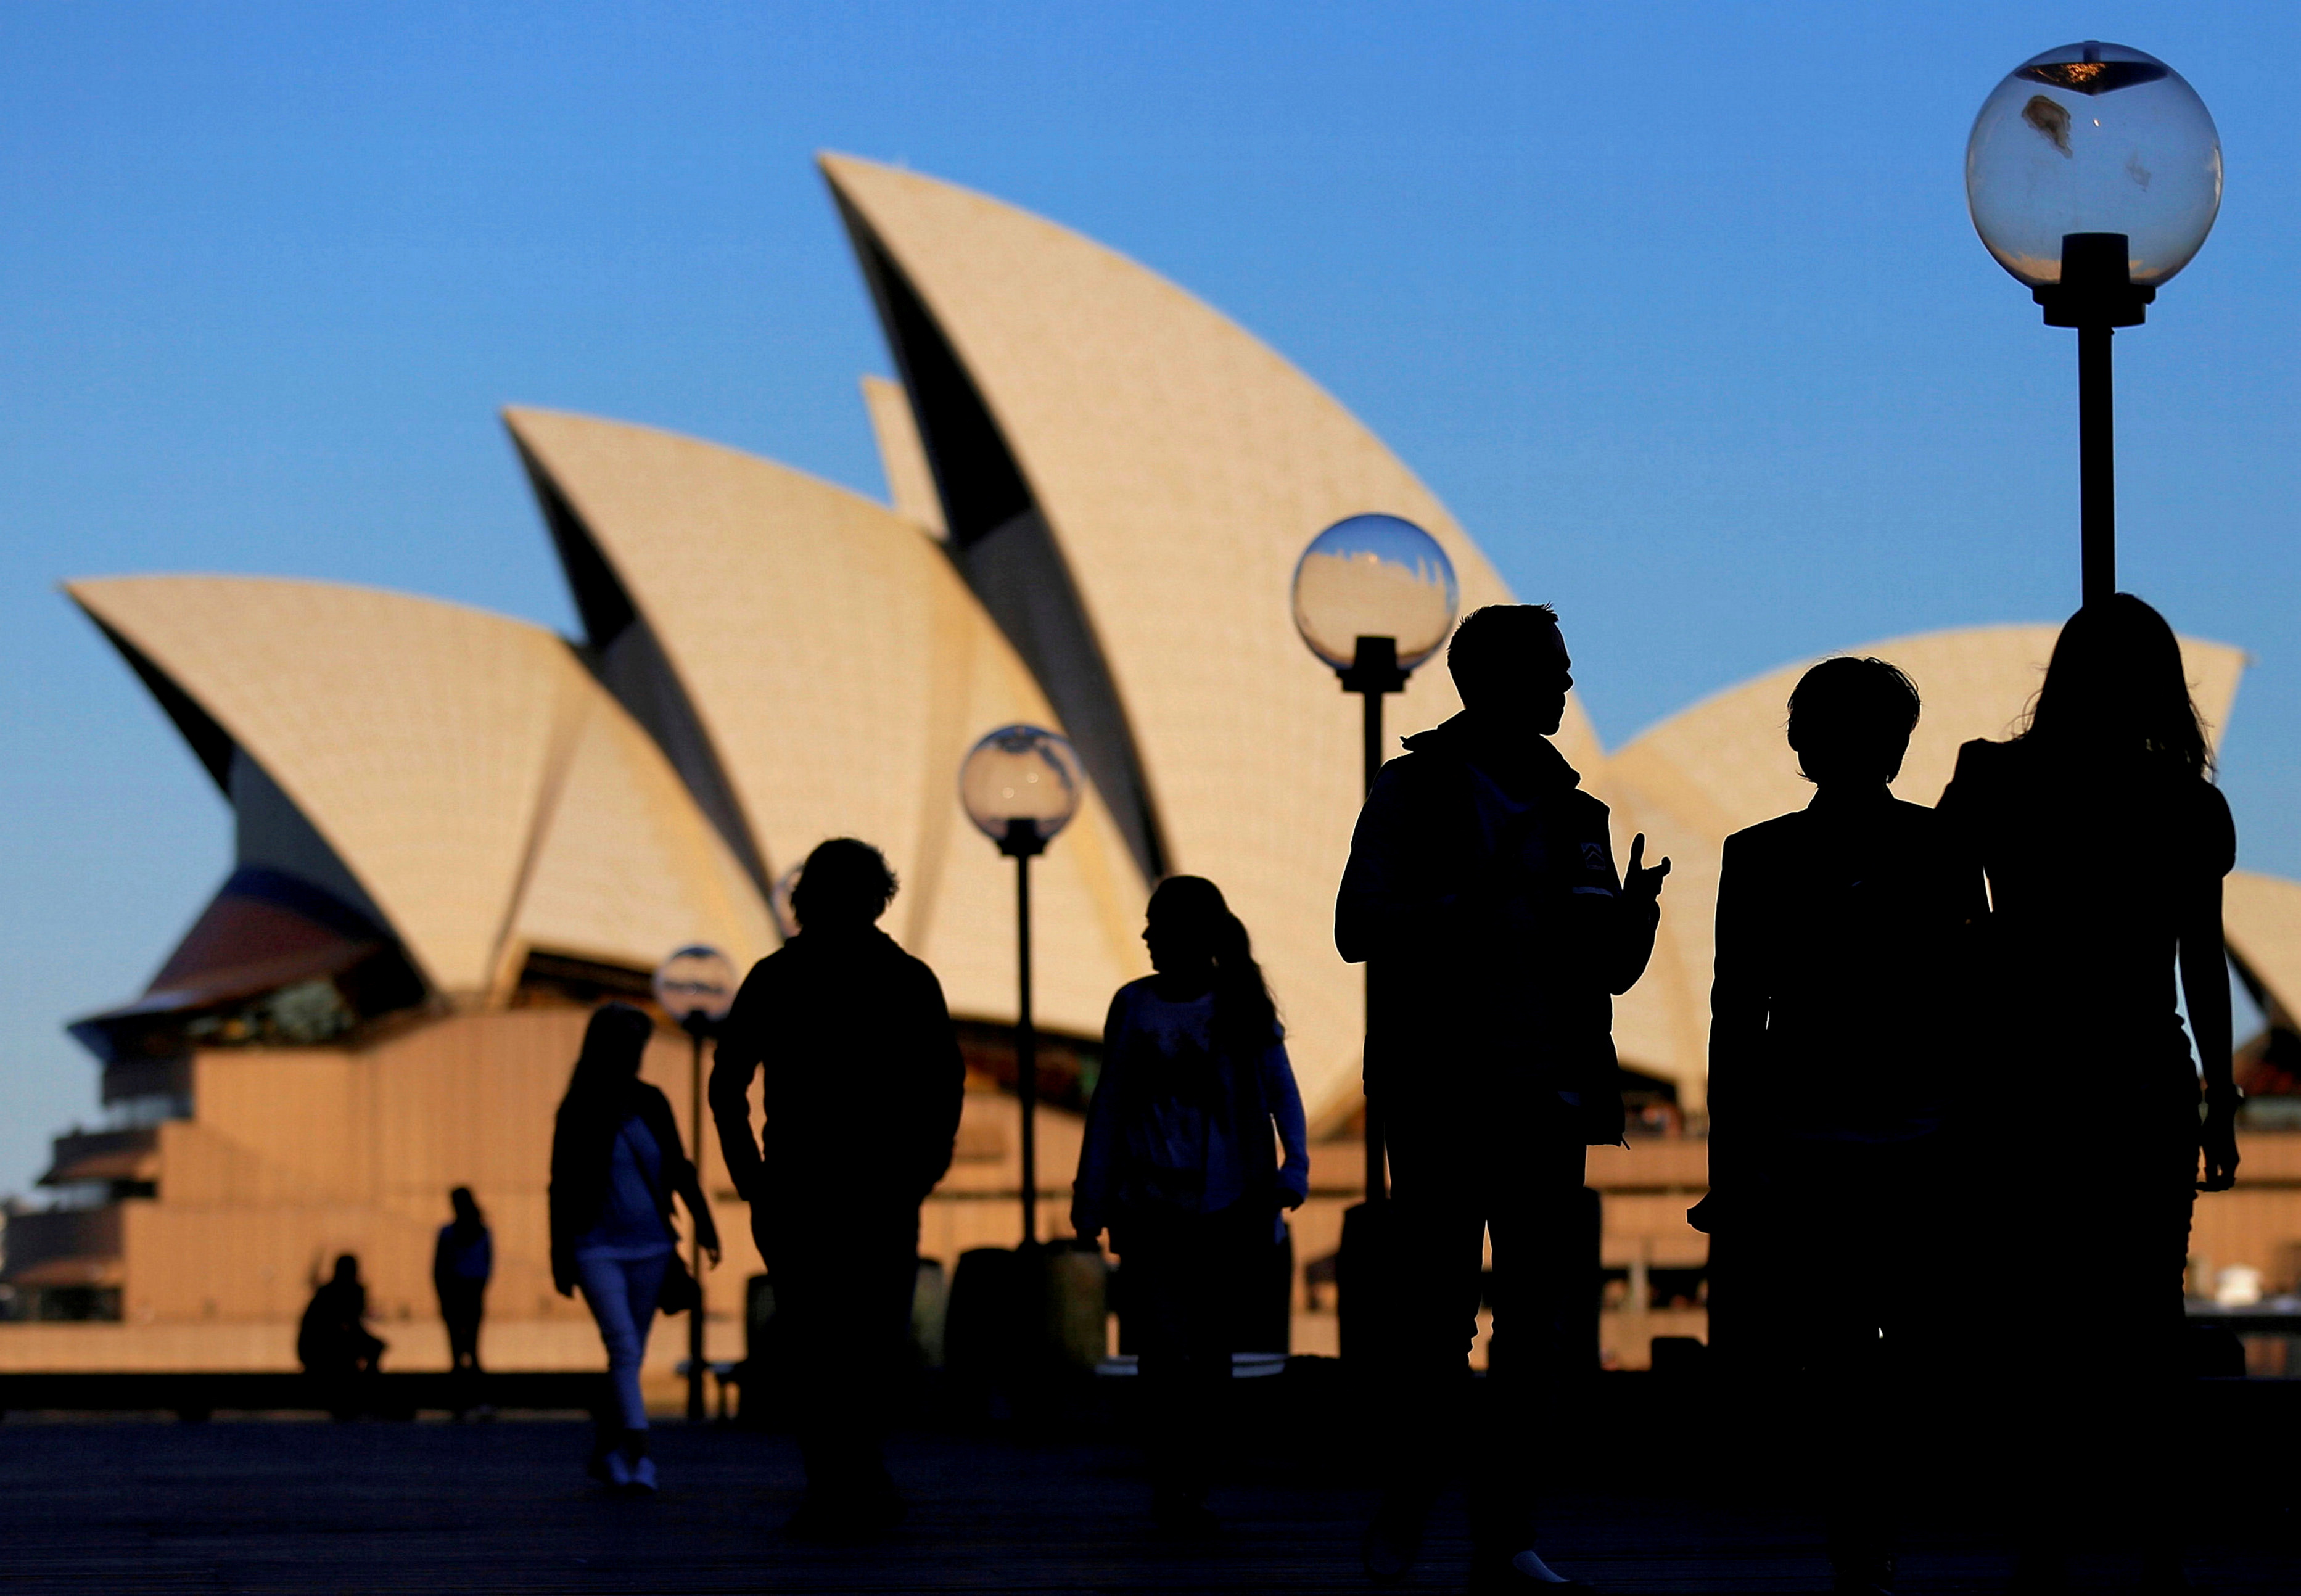 People are silhouetted against the Sydney Opera House at sunset in Australia, November 2, 2016. REUTERS/Steven Saphore